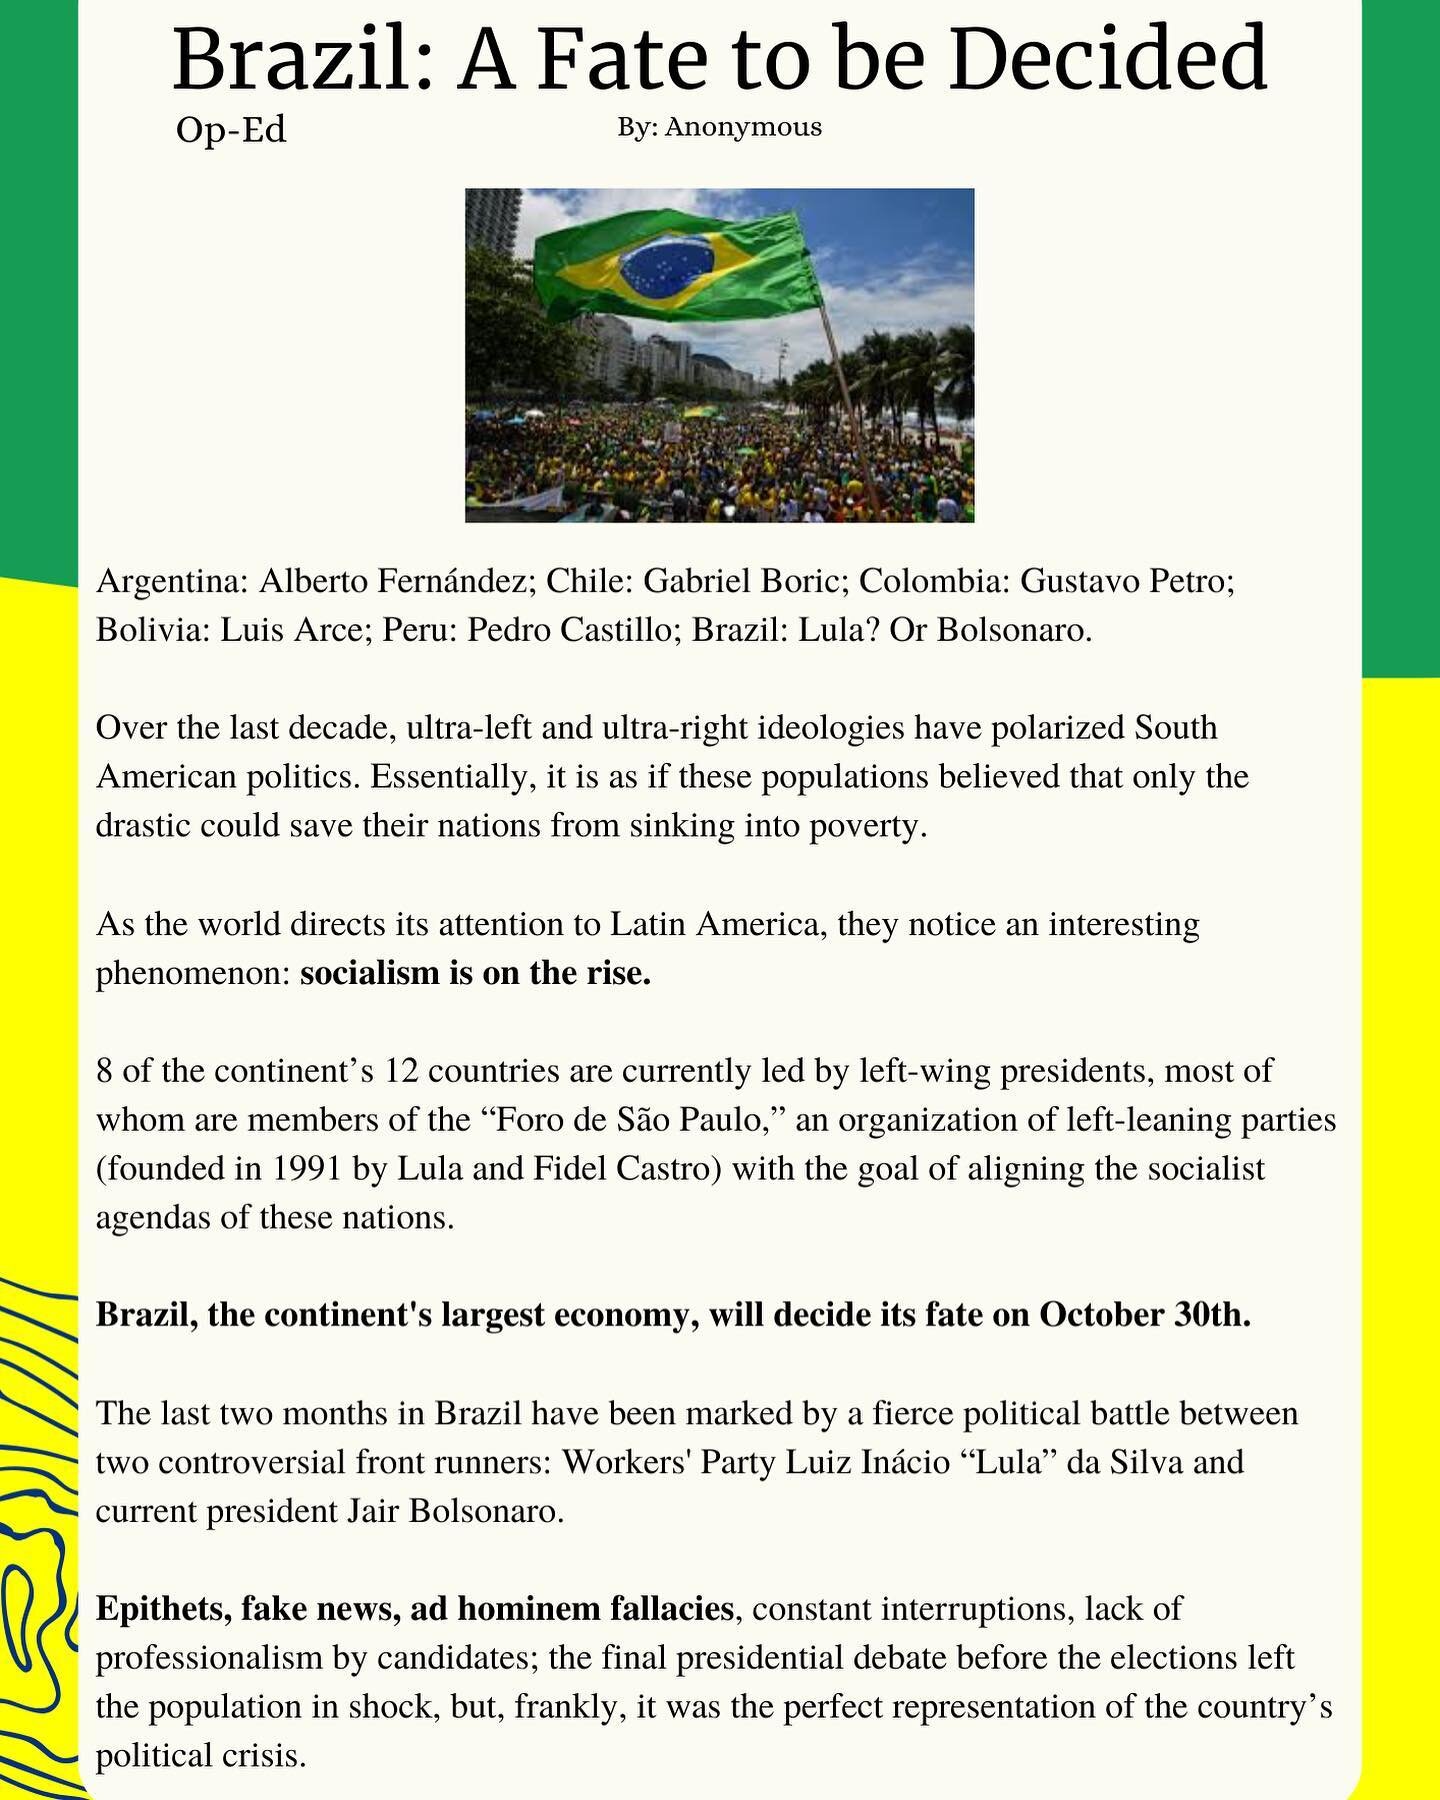 We&rsquo;re excited to share another Op-Ed about the elections in Brazil! 💚💛

Message from the writer:
&ldquo;Yesterday, I read and analyzed the op-ed published by Wharton Latino&rsquo;s El Periodico regarding the current political situation in Bra